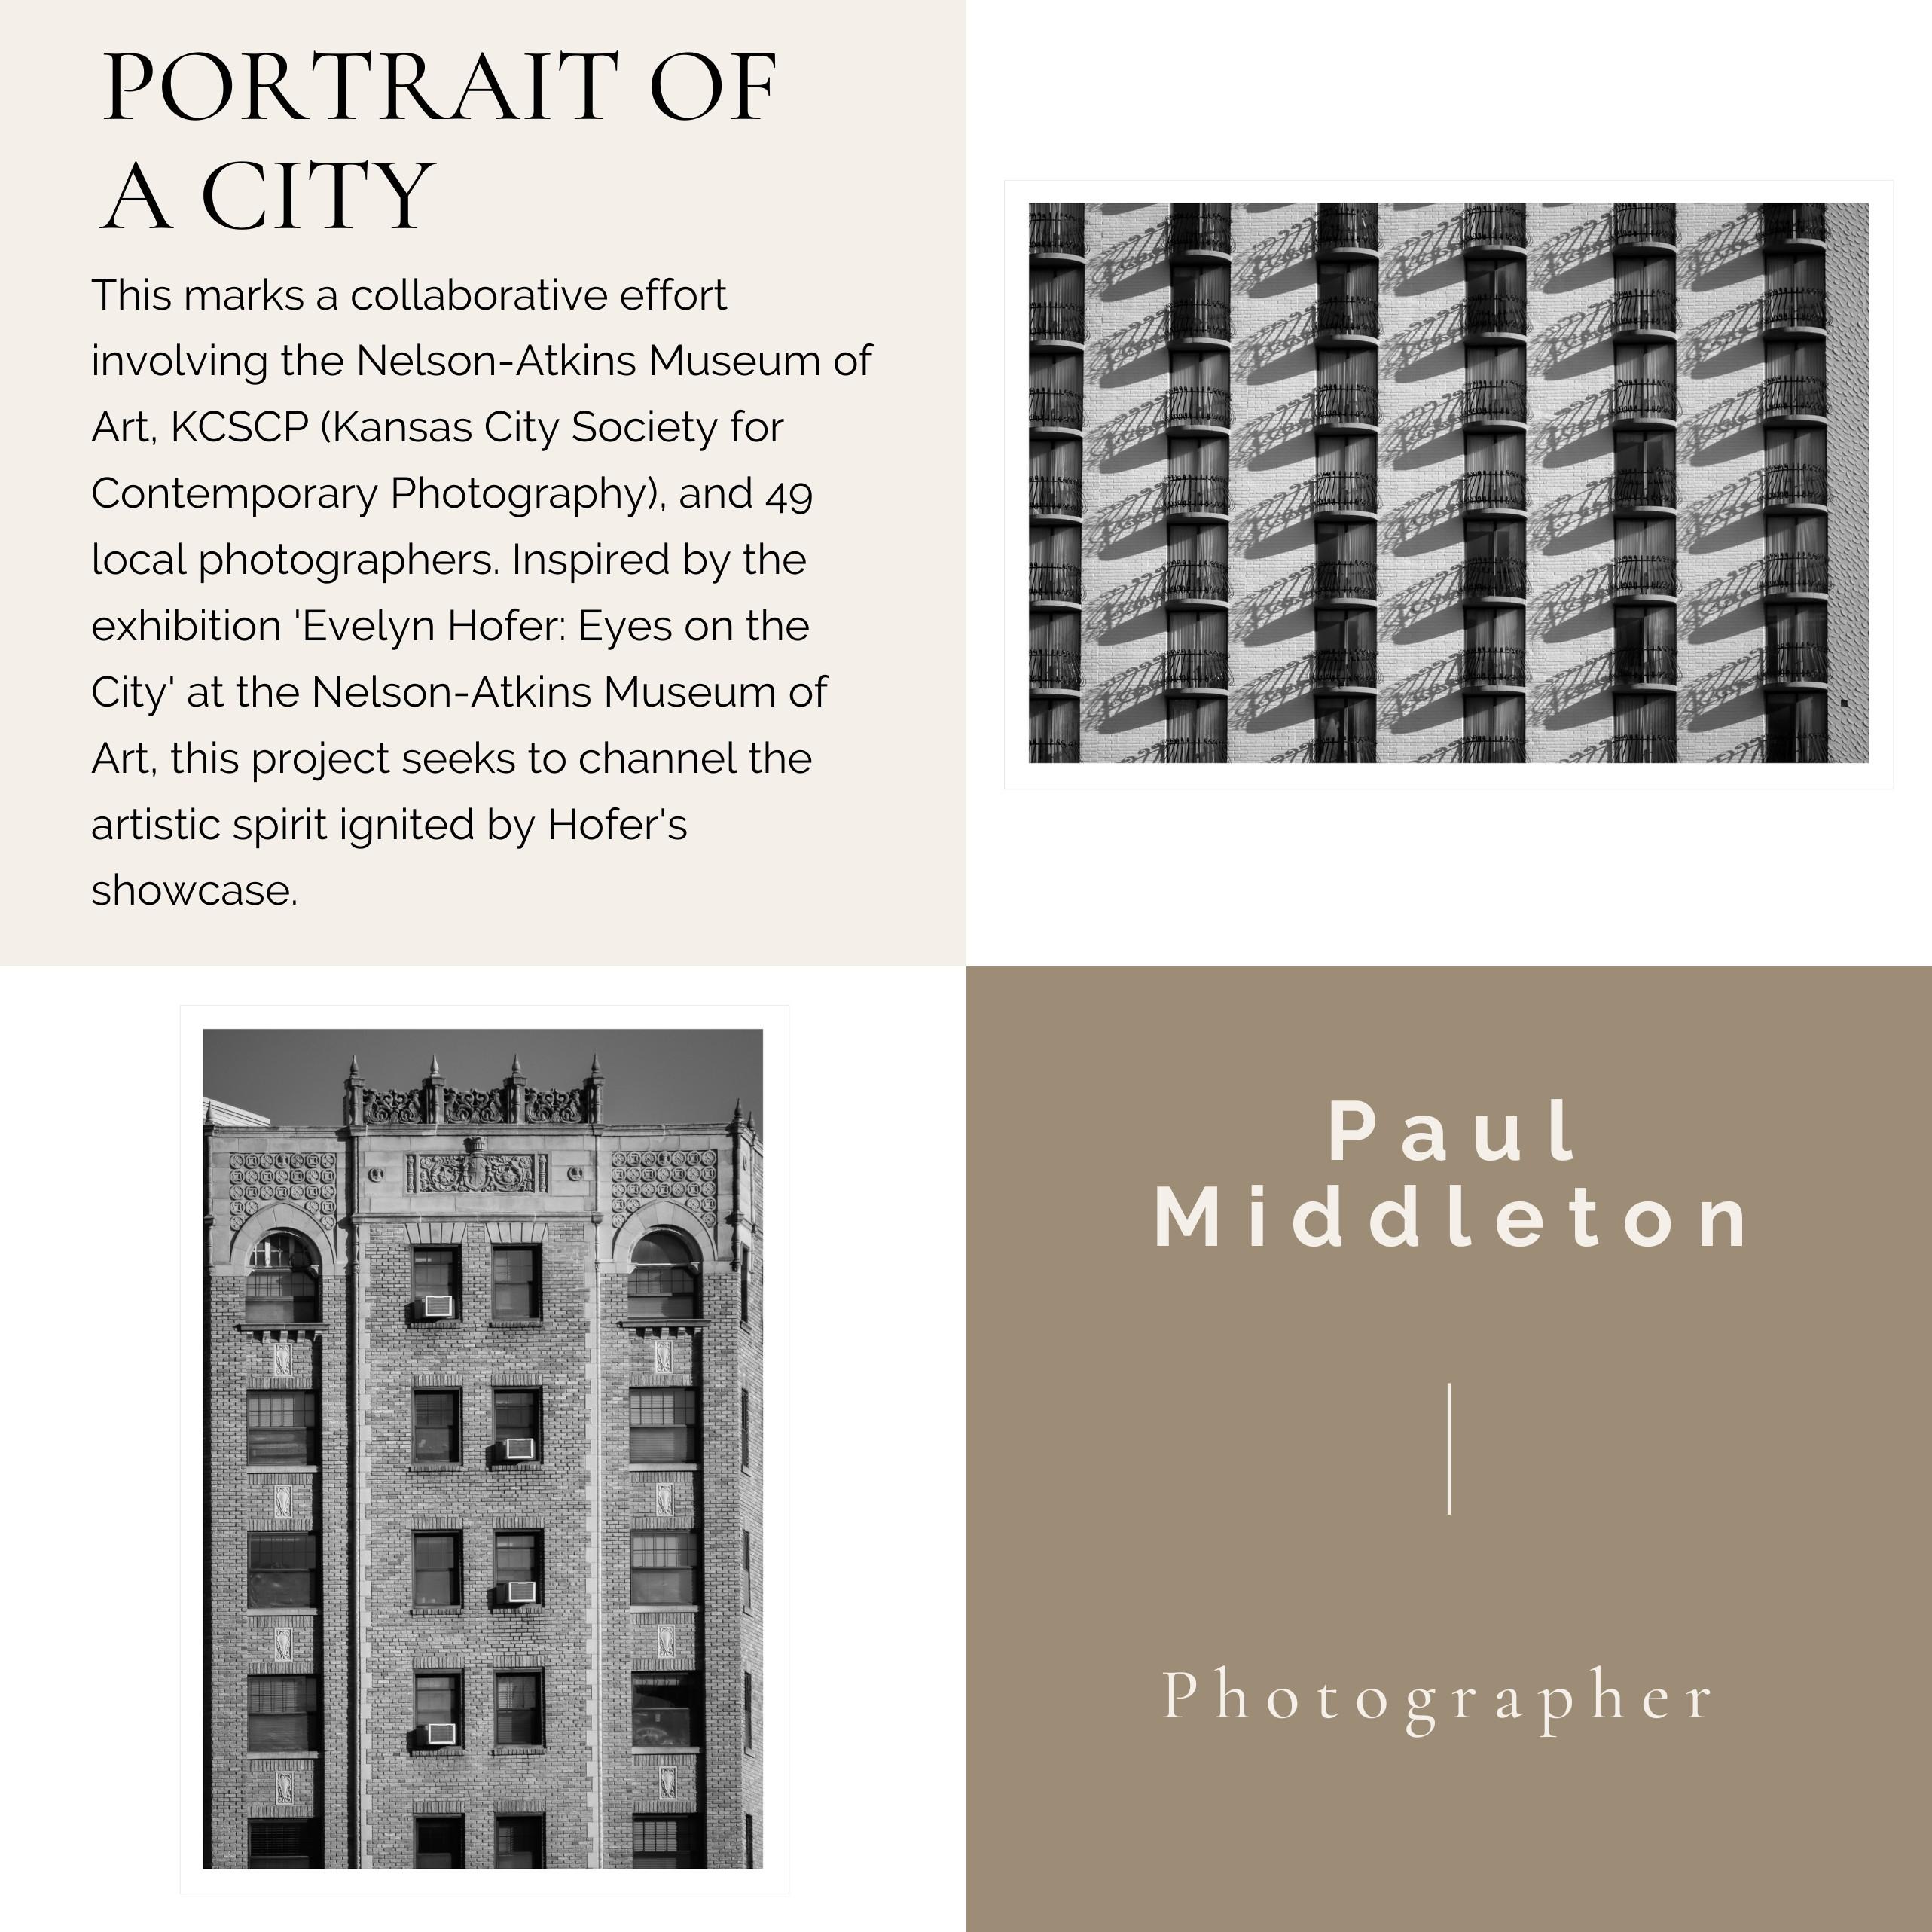 Paul Middleton
Westport
Year: 2024
Archival Pigment Print on
Hahnemuehle Baryta Rag
Framed Size: 13 x 13 x 0.25 inches
COA provided

*Ready to hang; matted and framed in a minimal black frame made from composite wood with standard plex

From